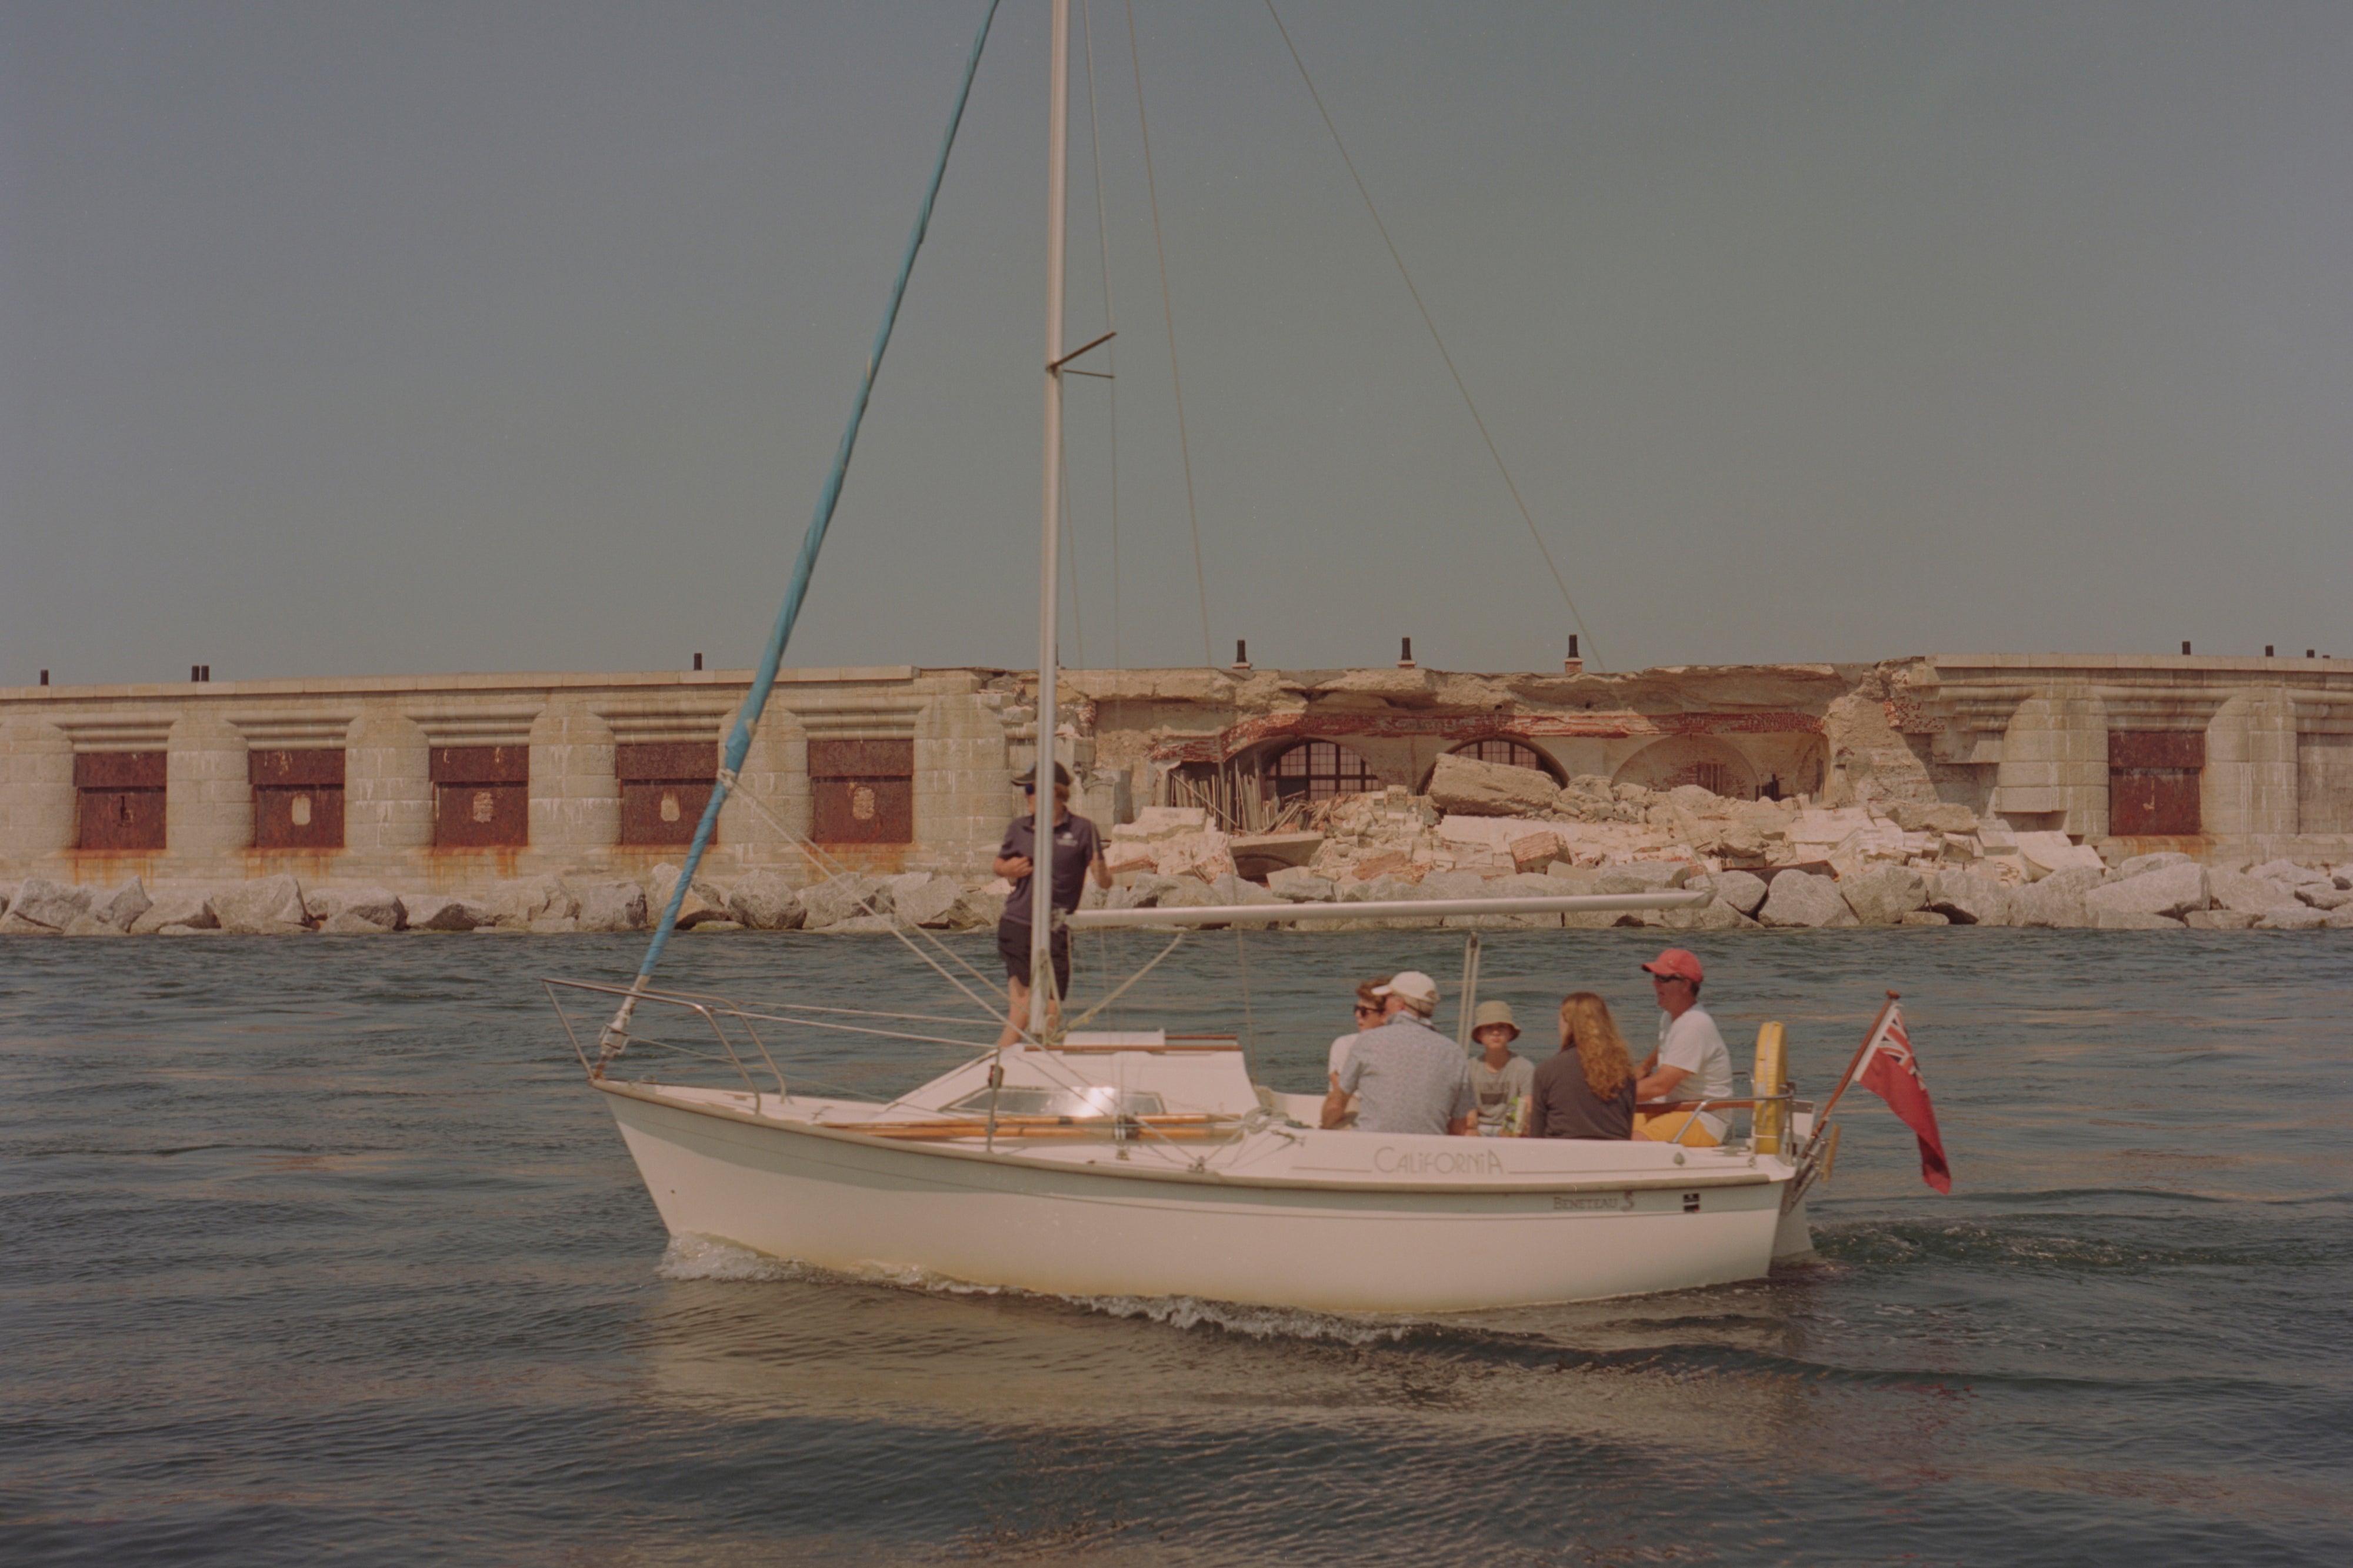 A sailing boat passes by Hurst Castle, alongside the collapsed wall of the east wing